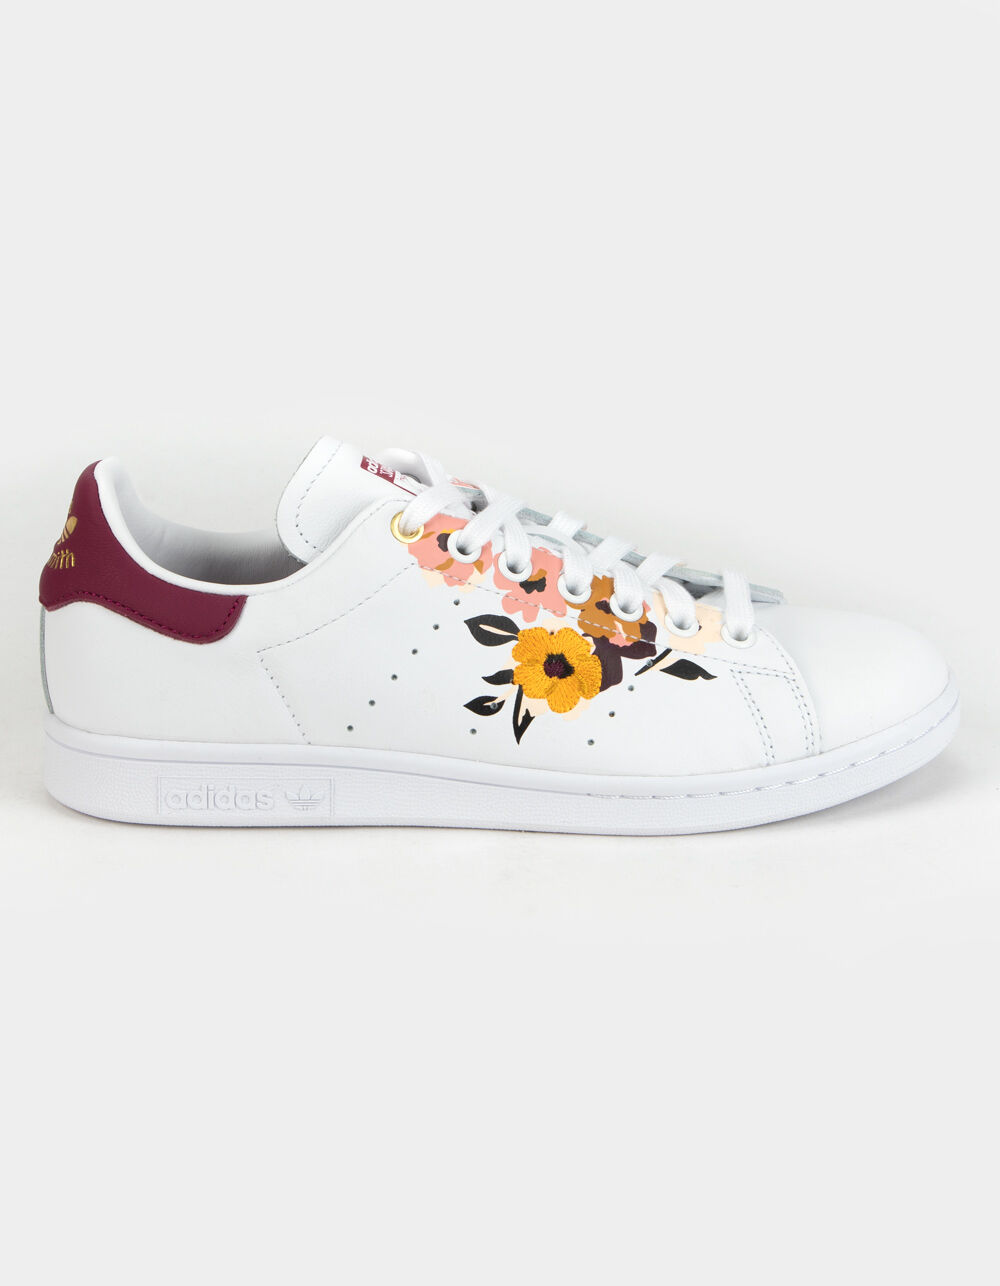 adidas Stan Smith Women FW2522 sneakers - Floral Pink/Blue